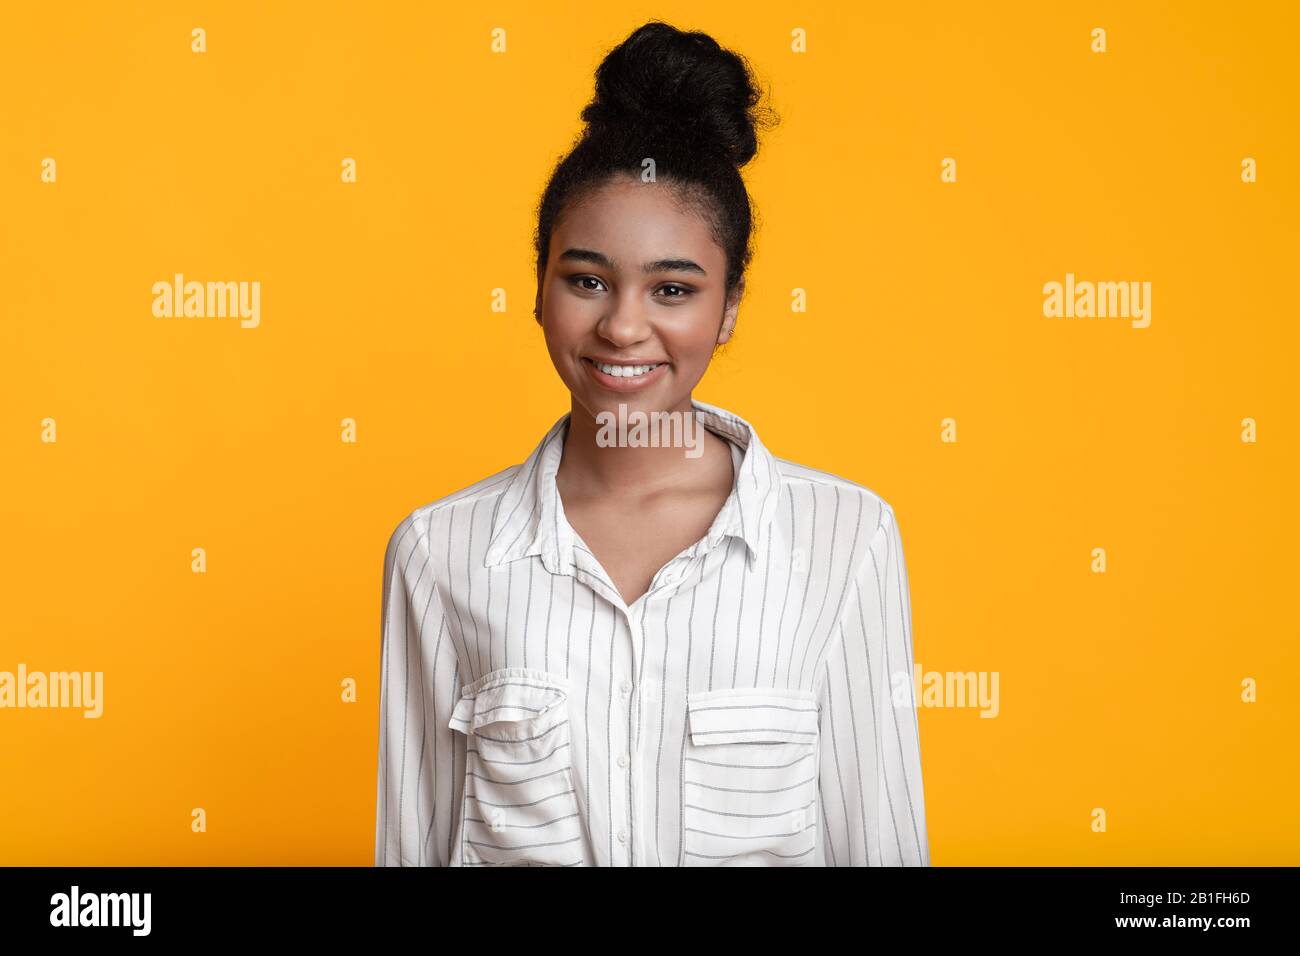 Portrait Of Smiling Afro Woman With Bun Hairstyle Over Yellow Background Stock Photo